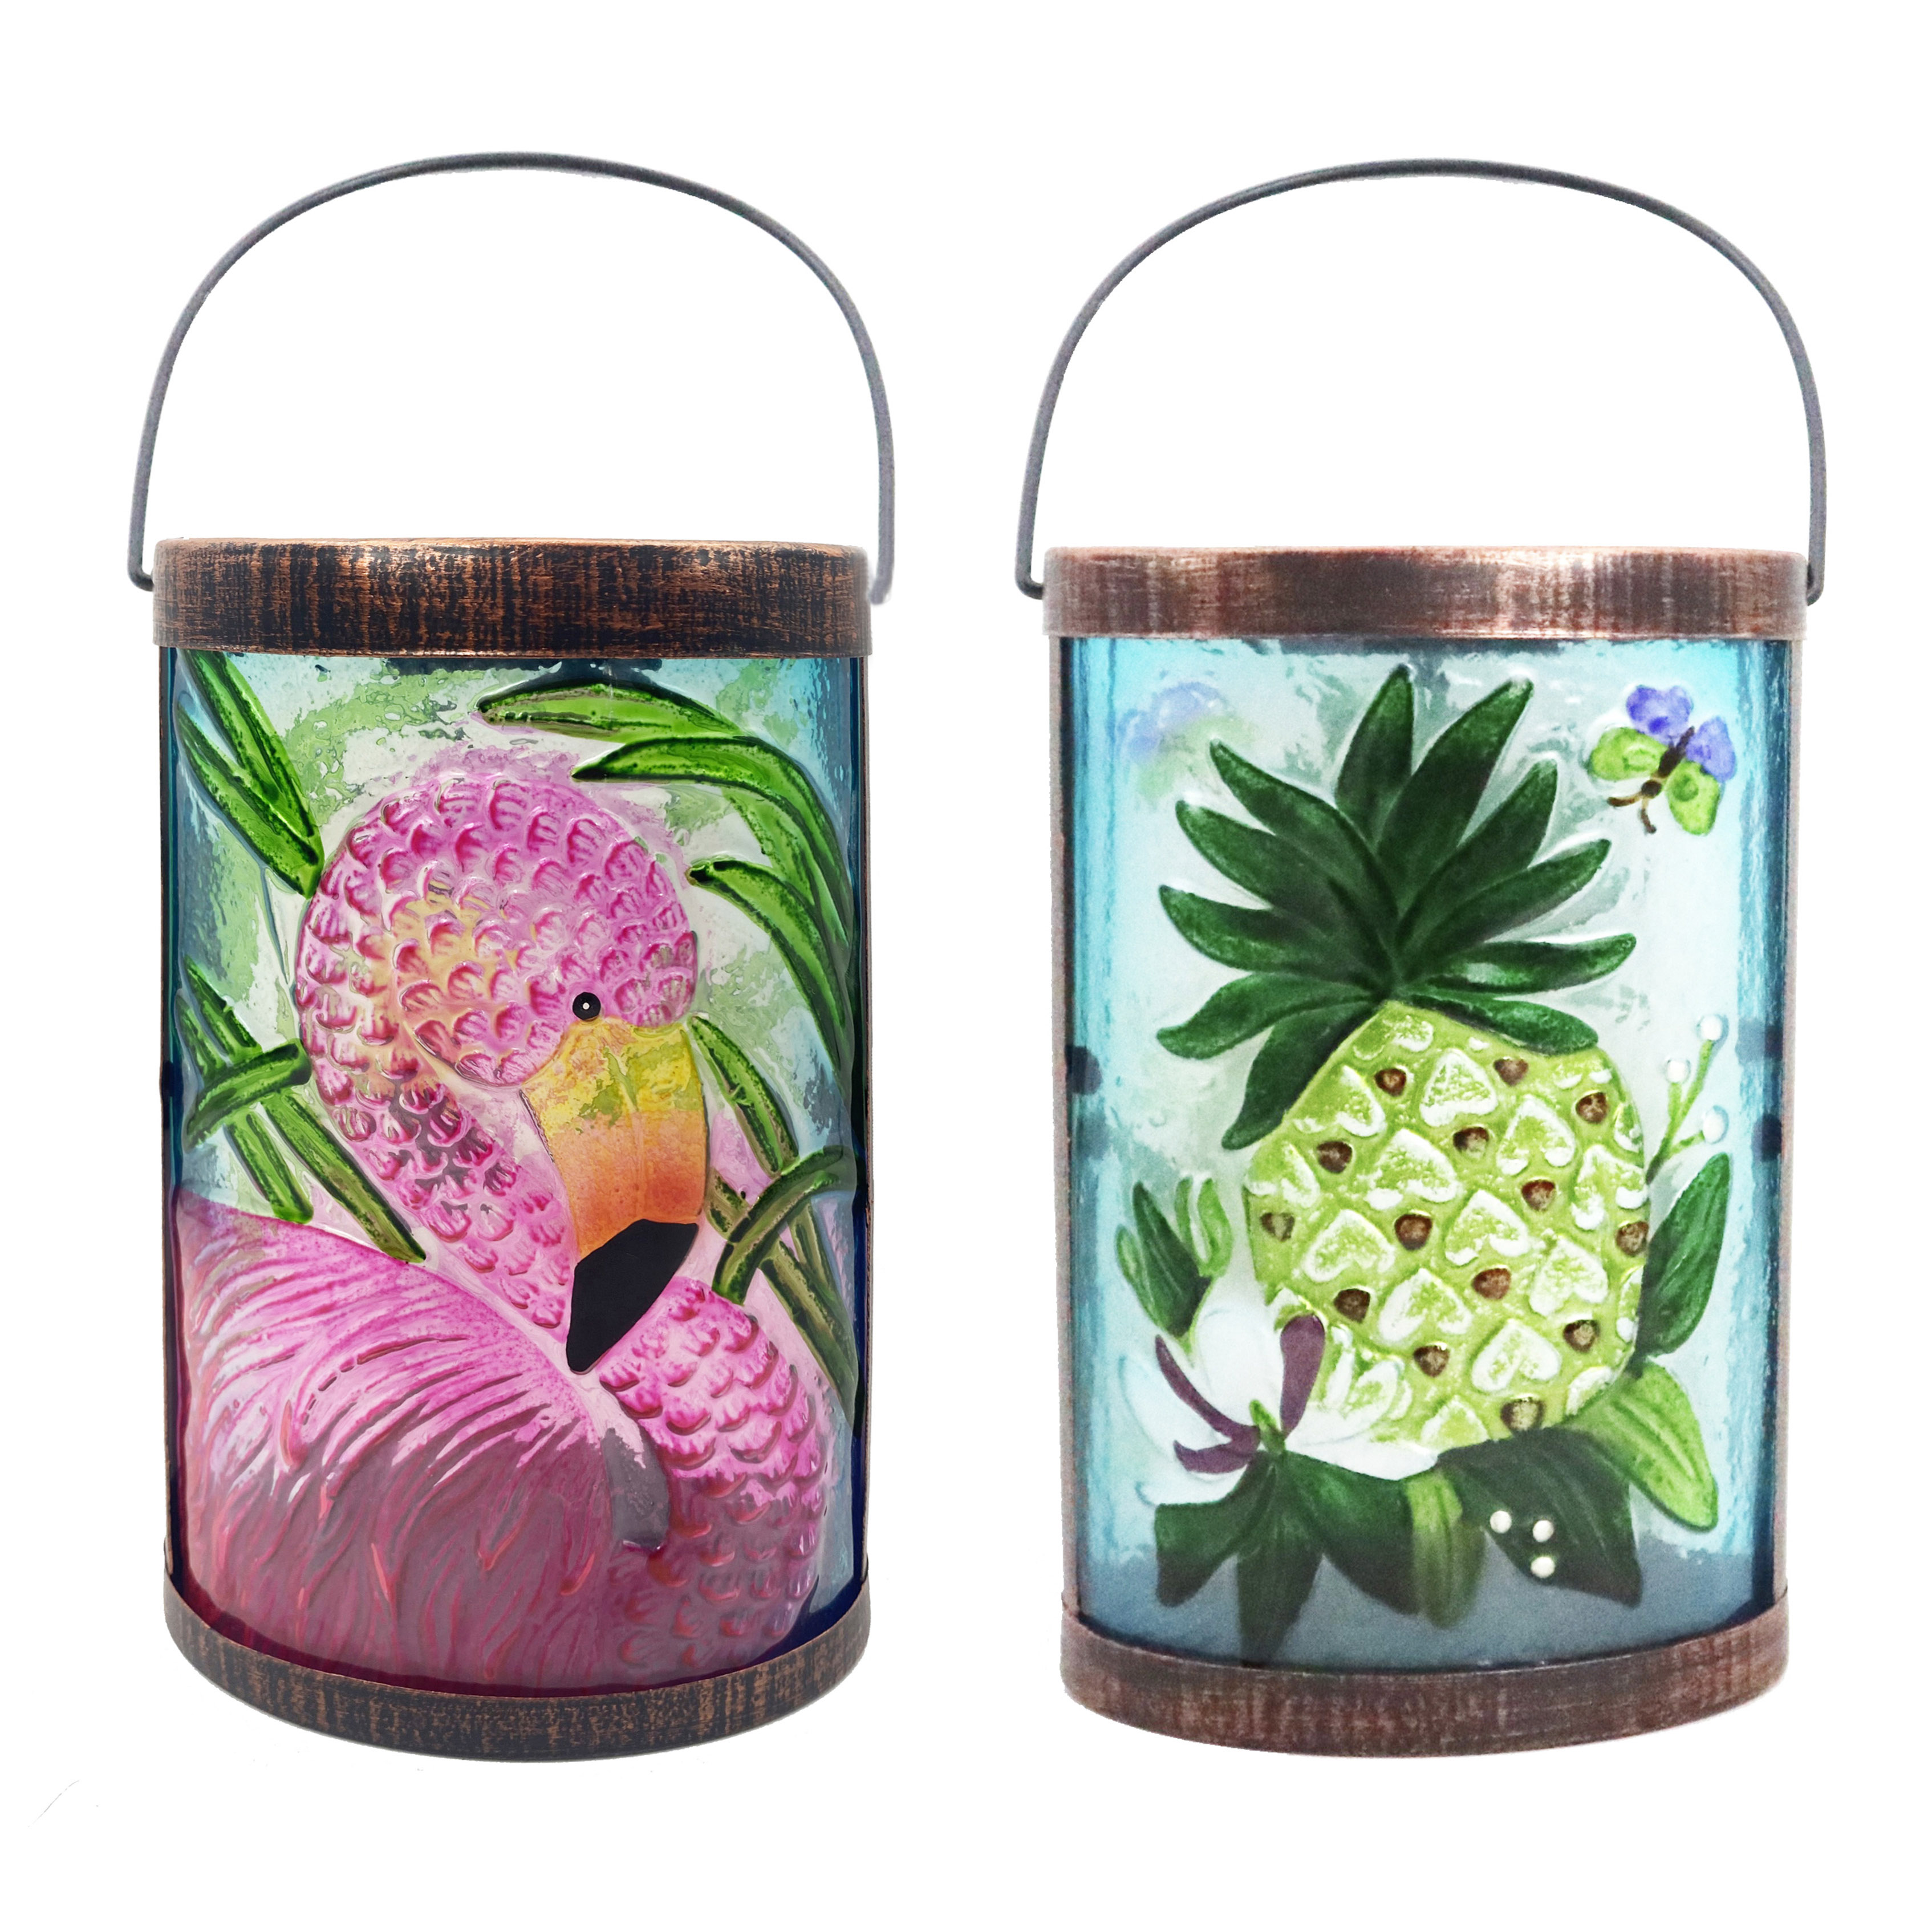 Outdoor Glass And Metal Lantern Decorative Hanging Garden Solar Lanterns With Handle